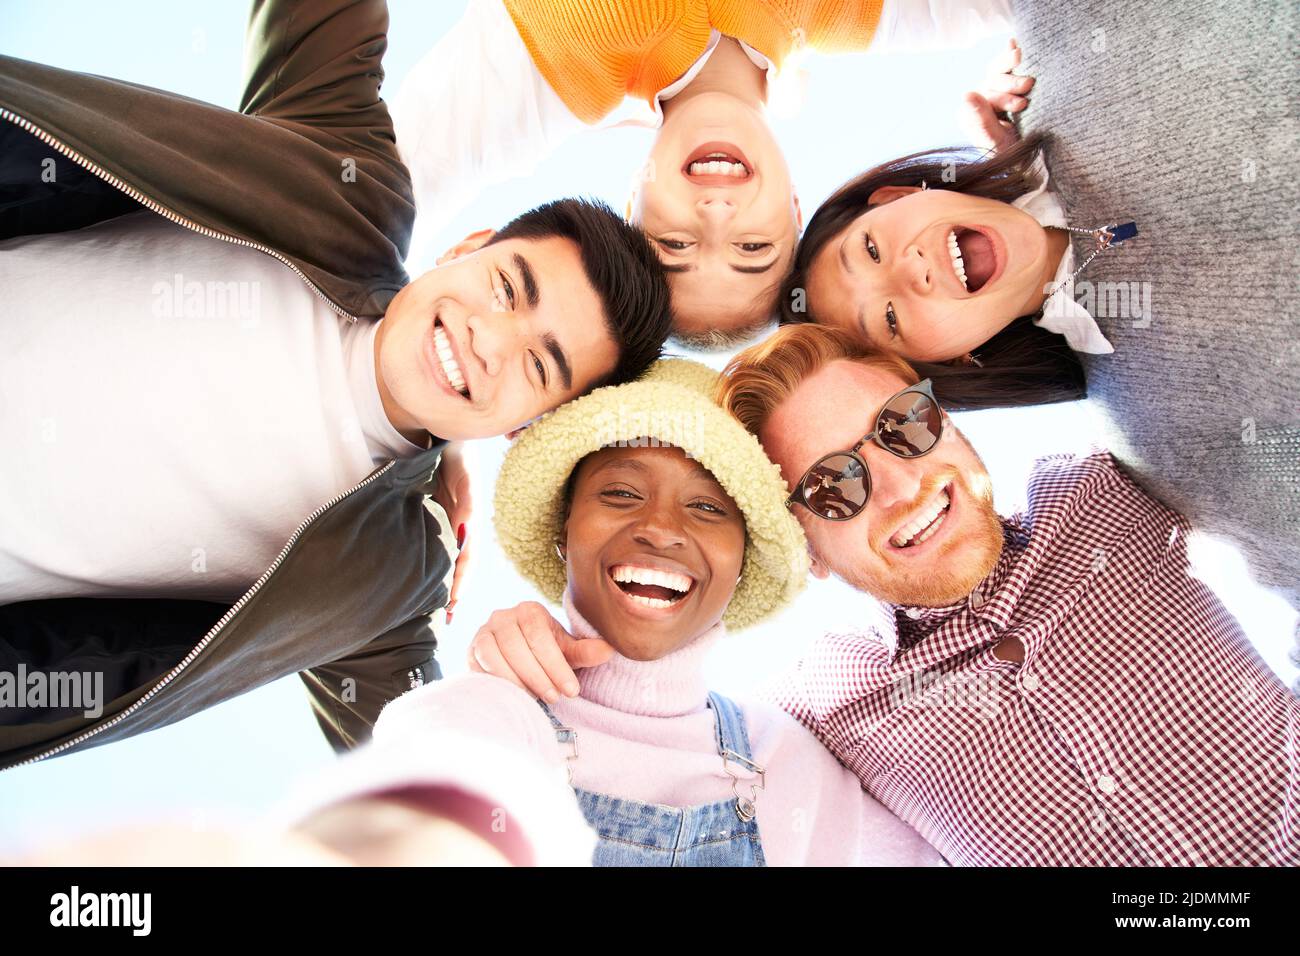 Smiling low angle circle selfie of cheerful group of young people. Happy friends excited having fun. Boys and girls taking picture looking at camera Stock Photo